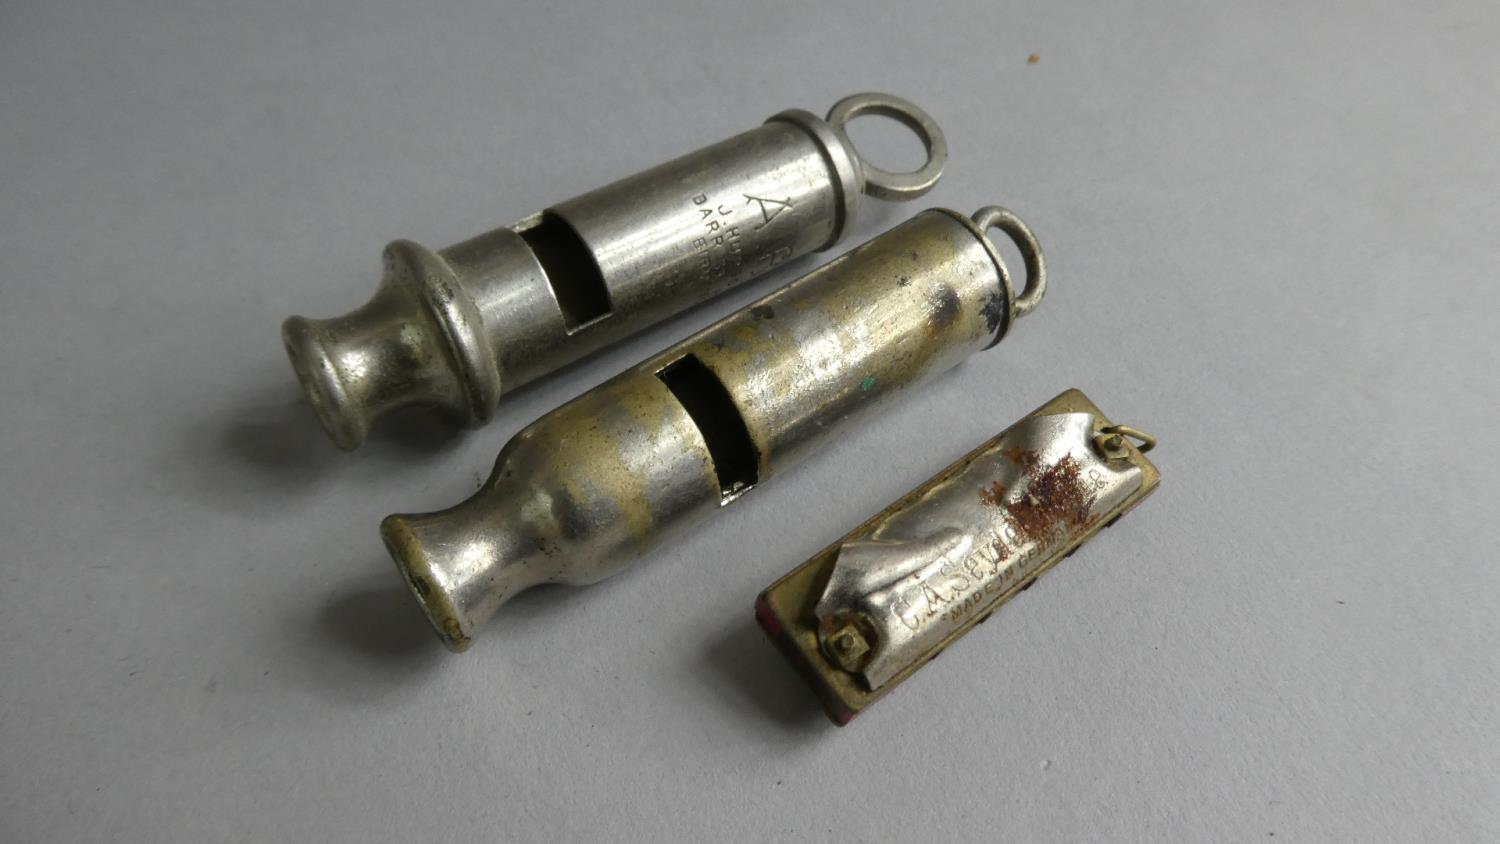 A Hudson ARP WWII Whistle, an Unmarked Example and a German "Little Bandmaster" Miniature Harmonica